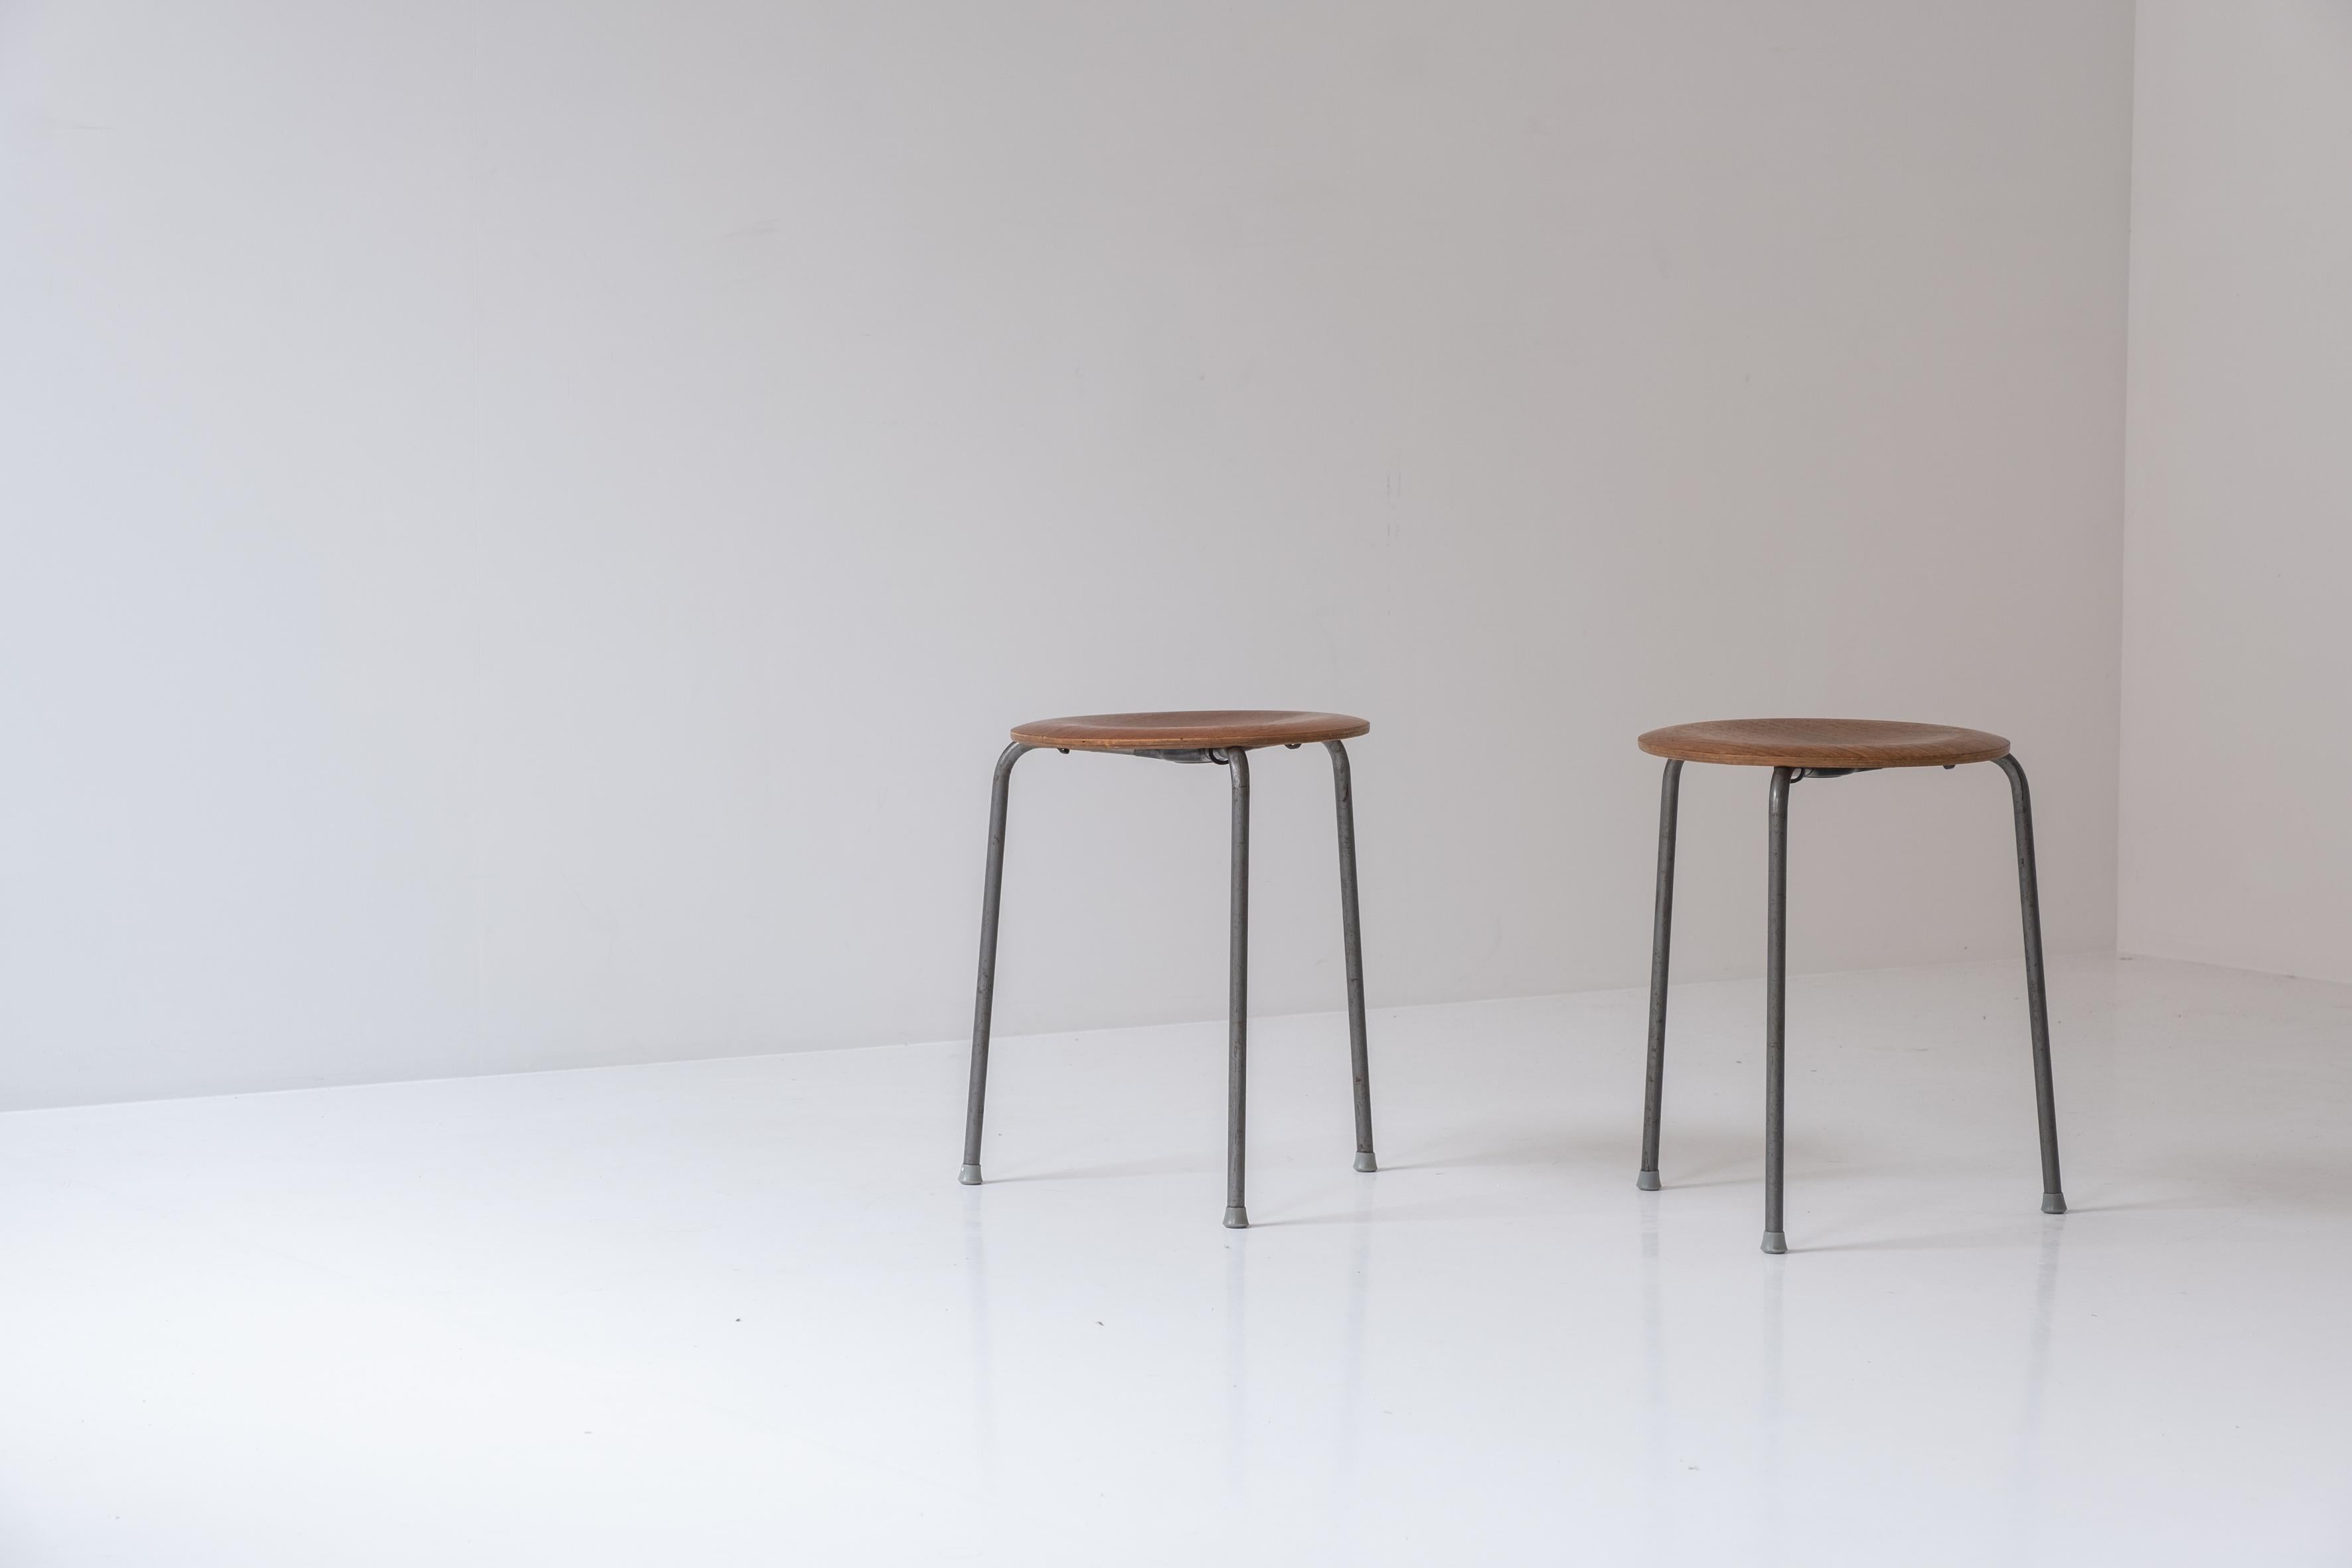 First edition pair ‘DOT’ stools by Arne Jacobsen for Fritz Hansen, Denmark 1960s. This three legged stool features nickel plated metal legs with teak seat top. Presented in its original condition. Could be restored upon request. Labeled underneath.